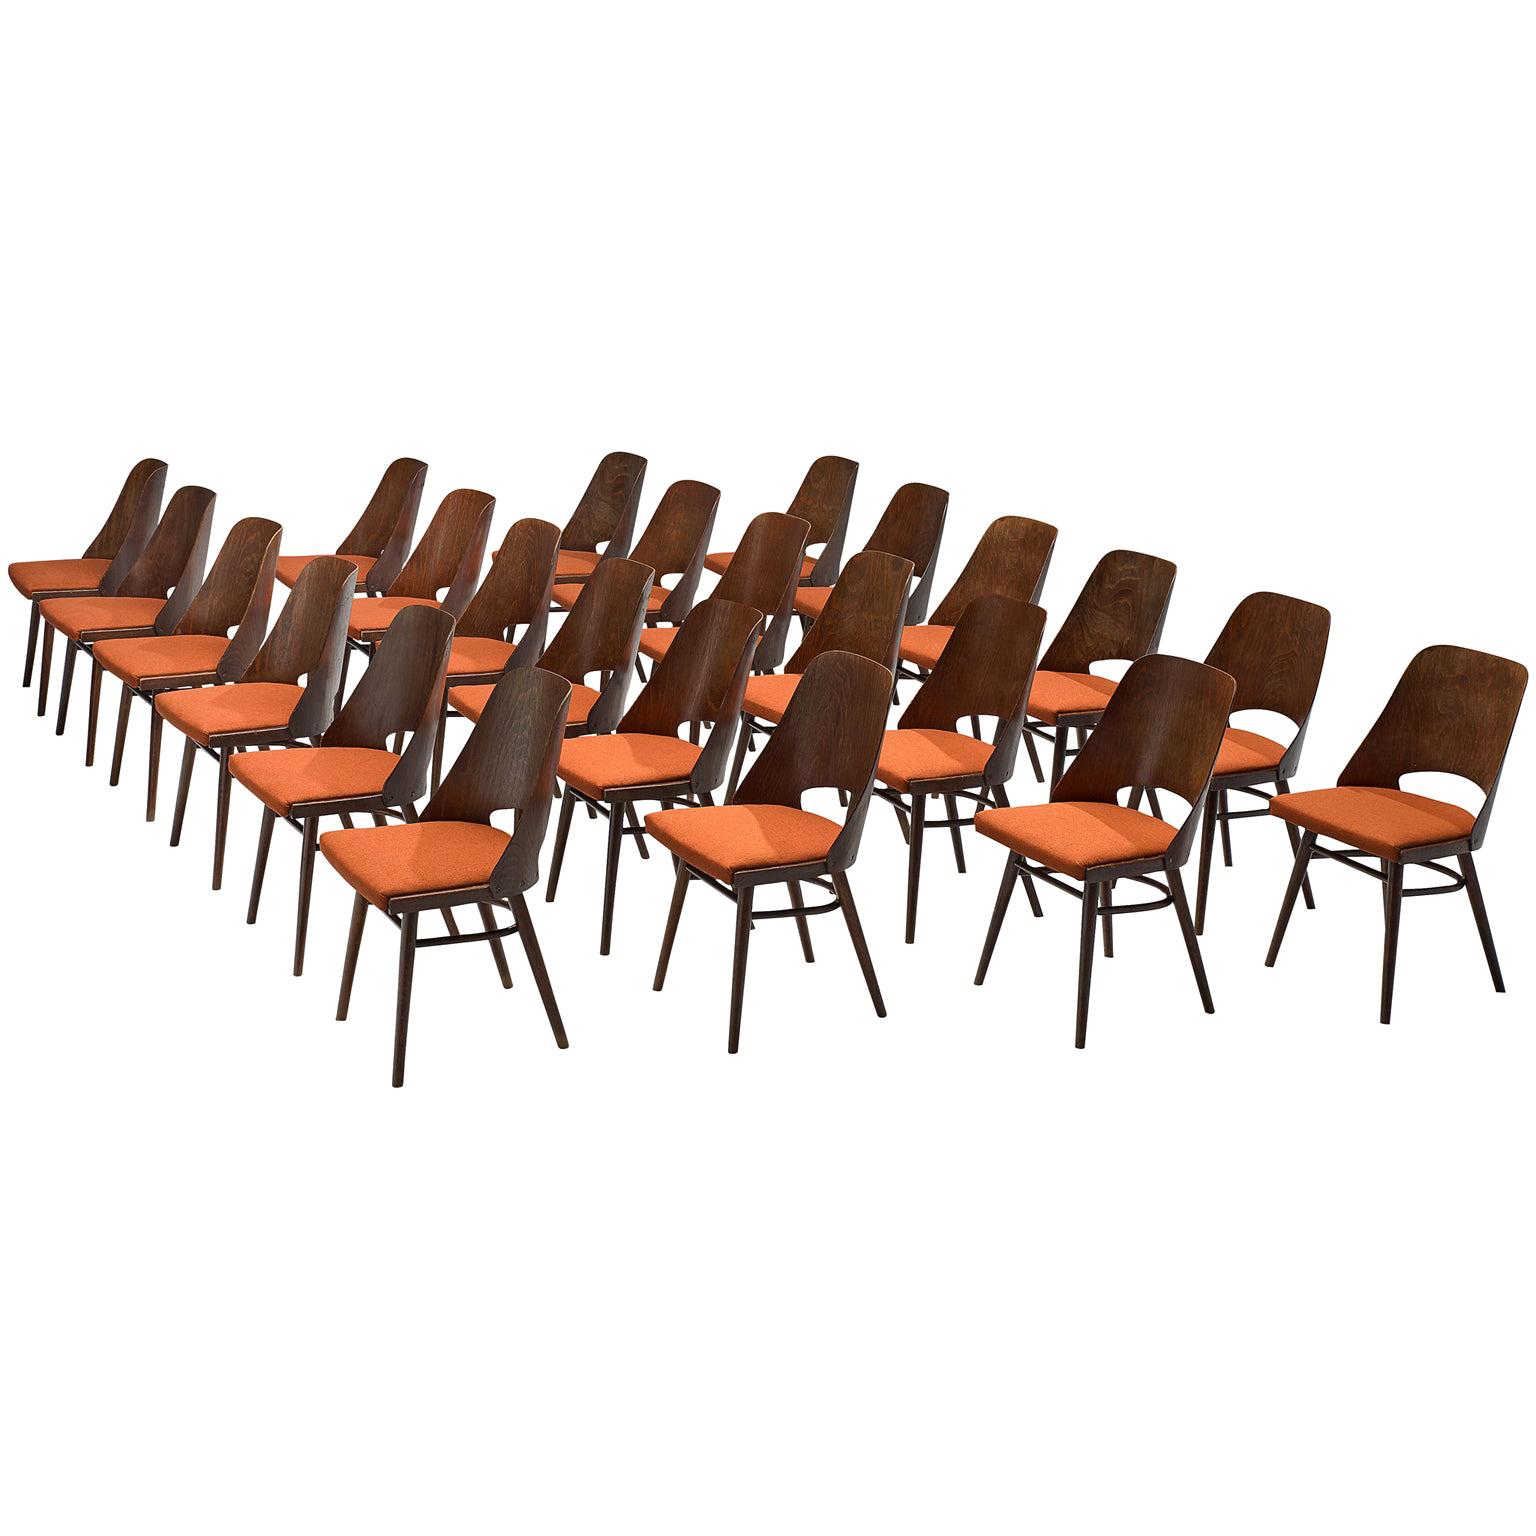 Large Set of Twenty-Four Bentwood Dining Chairs with Coral Upholstery